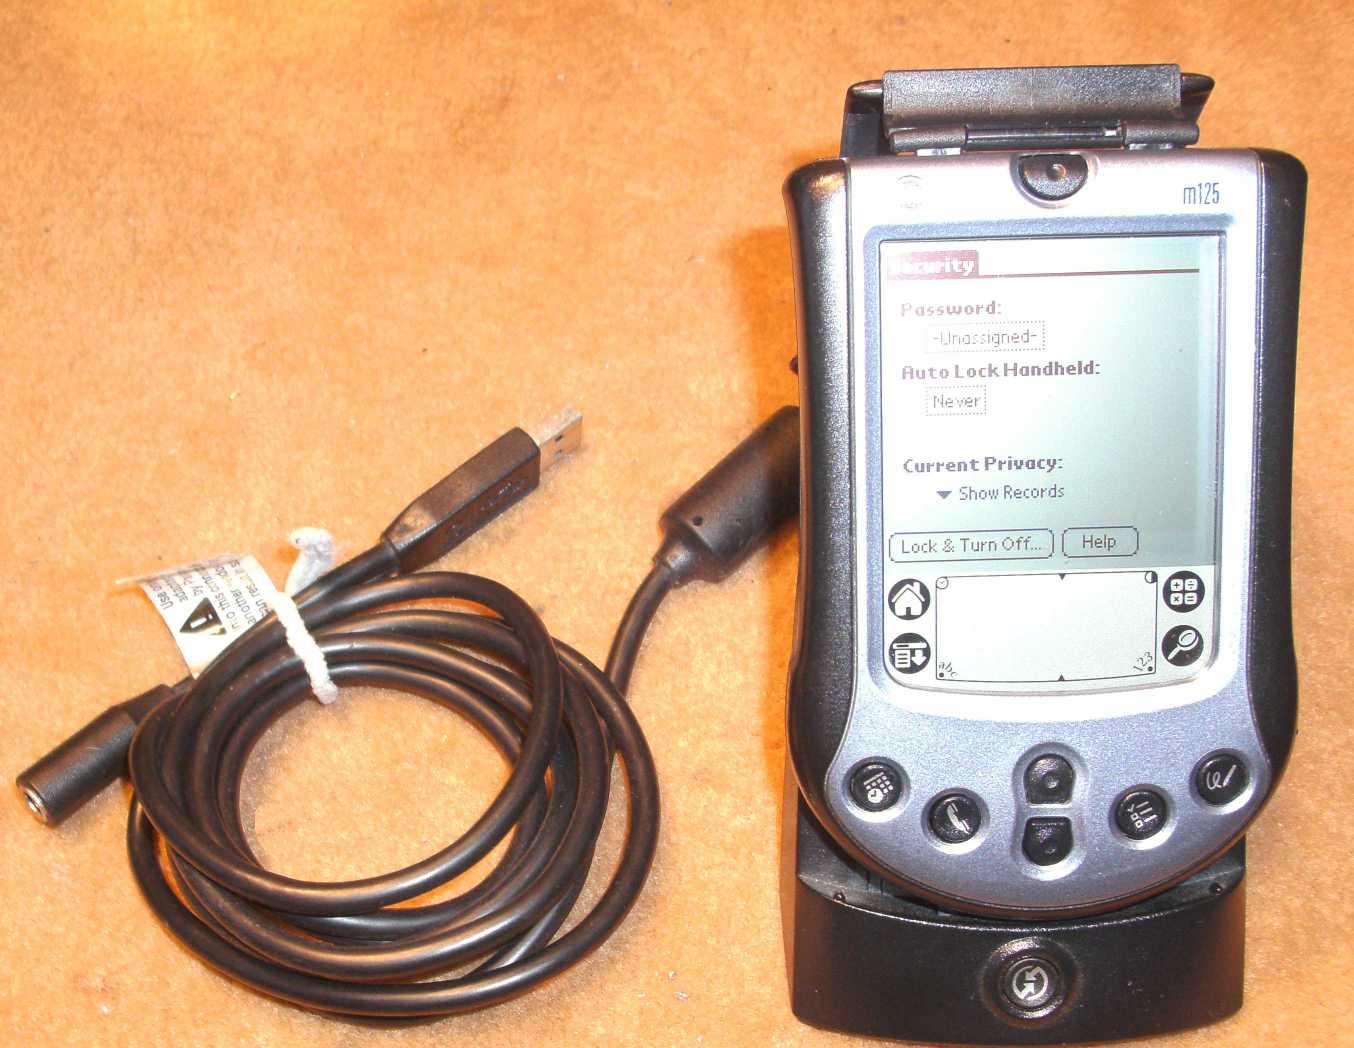 Palm Pilot M125 with Charger